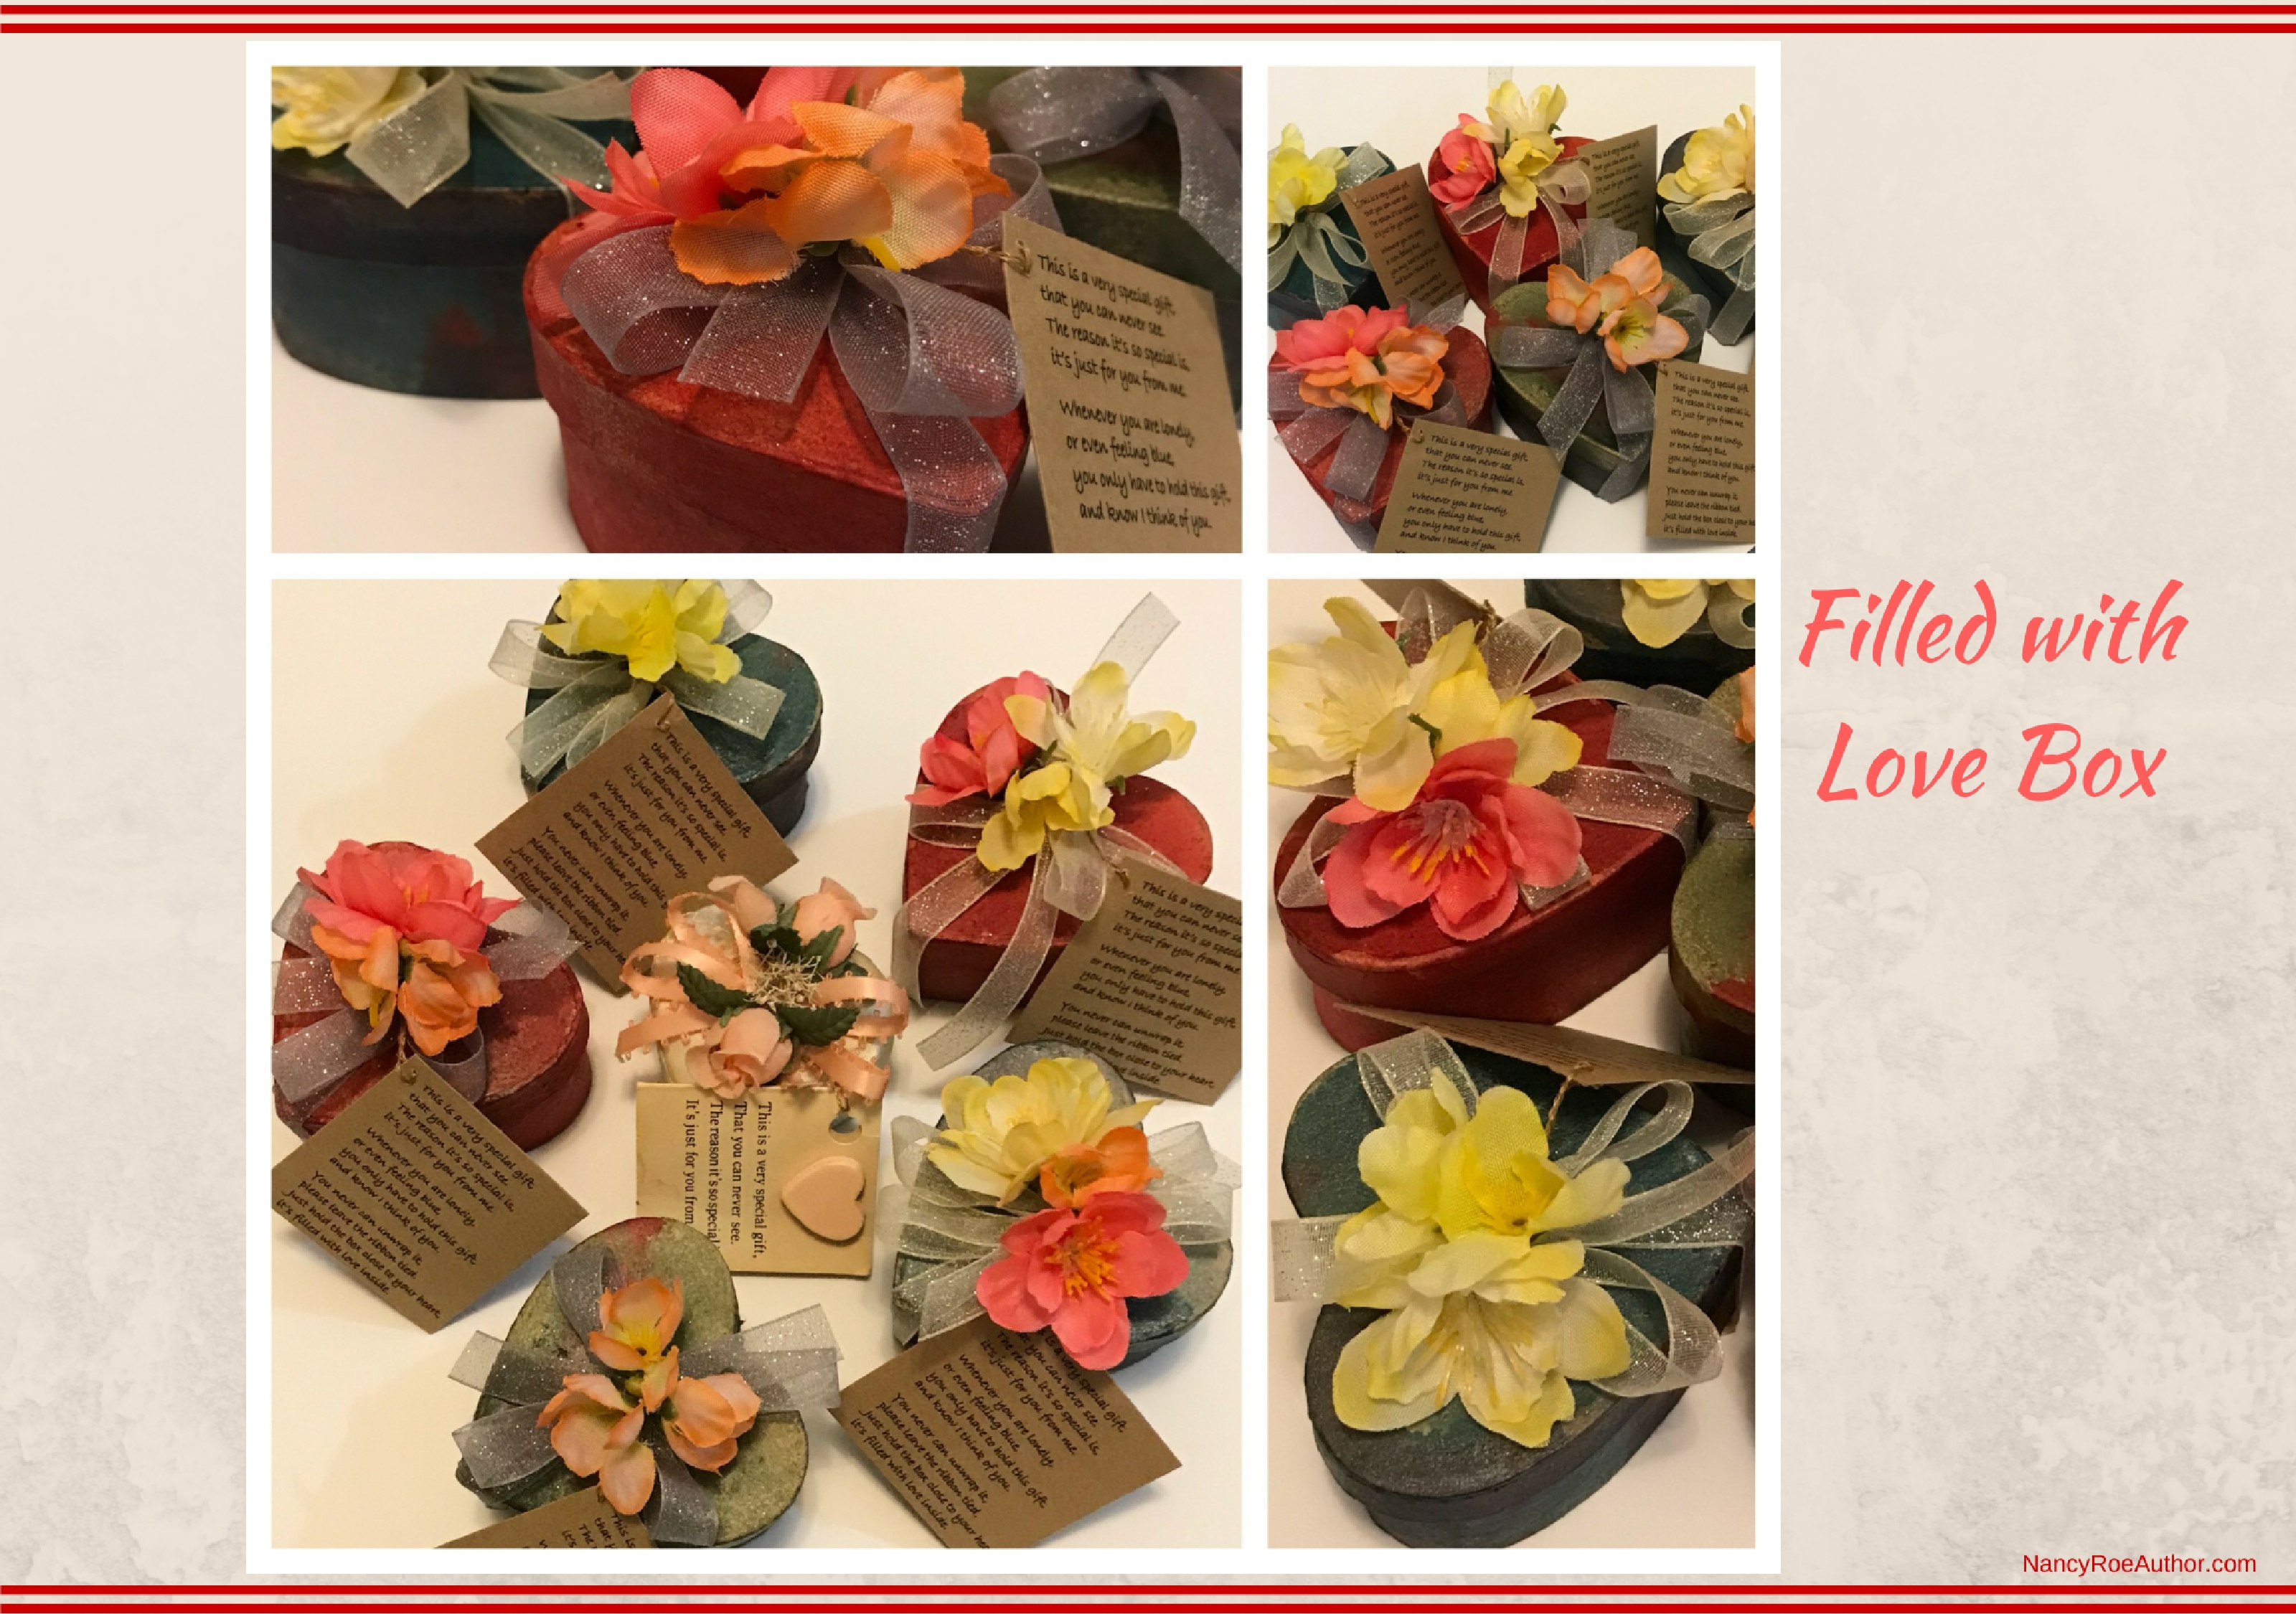 Filled with Love Box